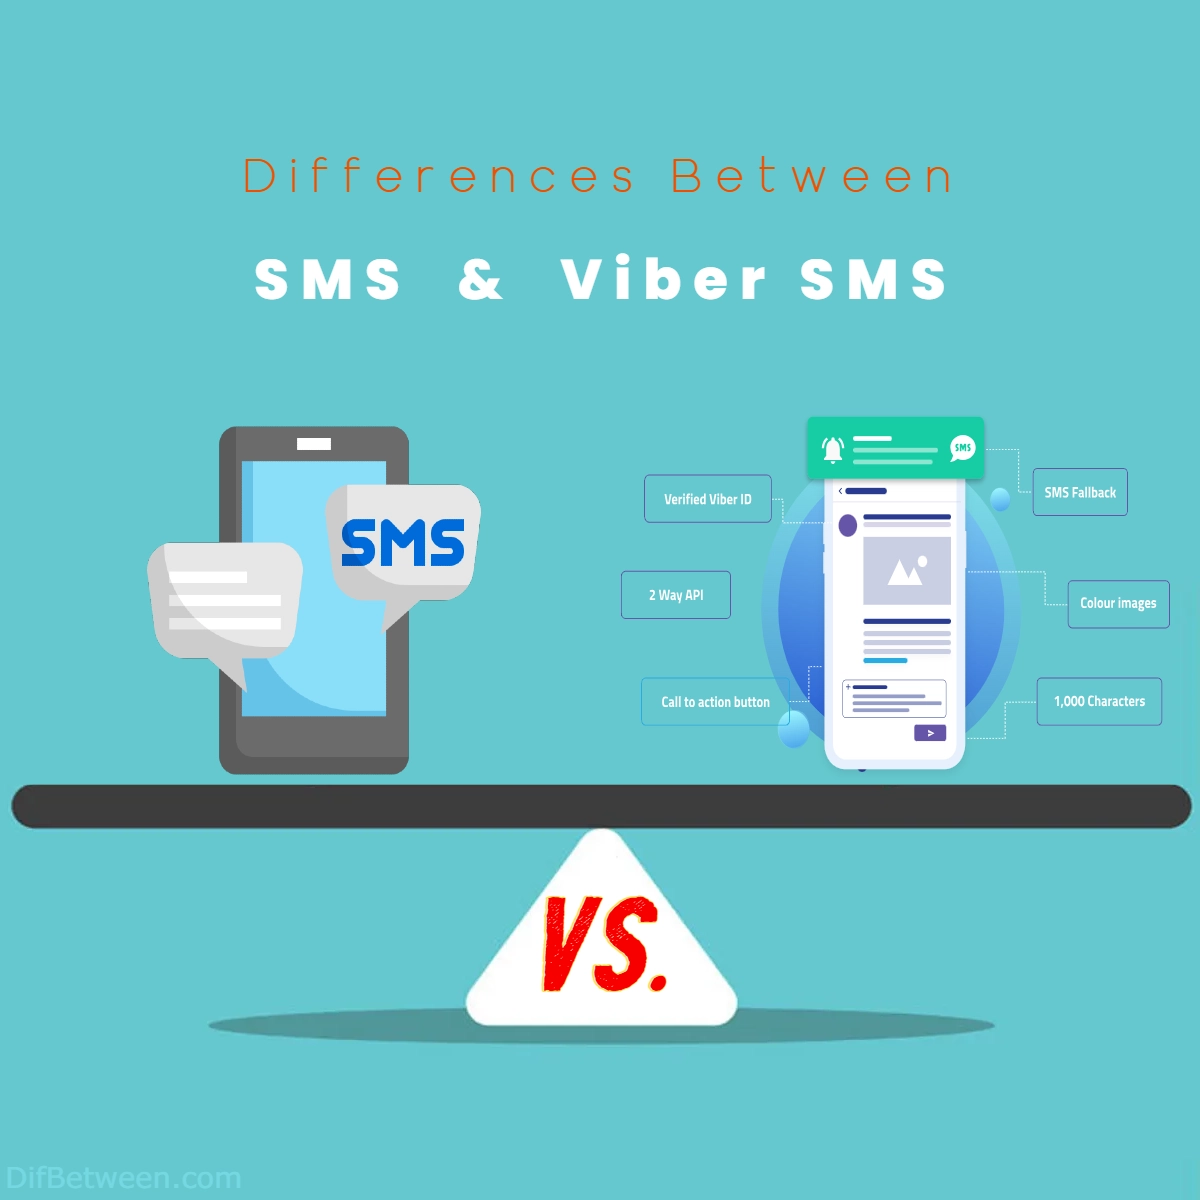 Differences Between SMS and Viber SMS